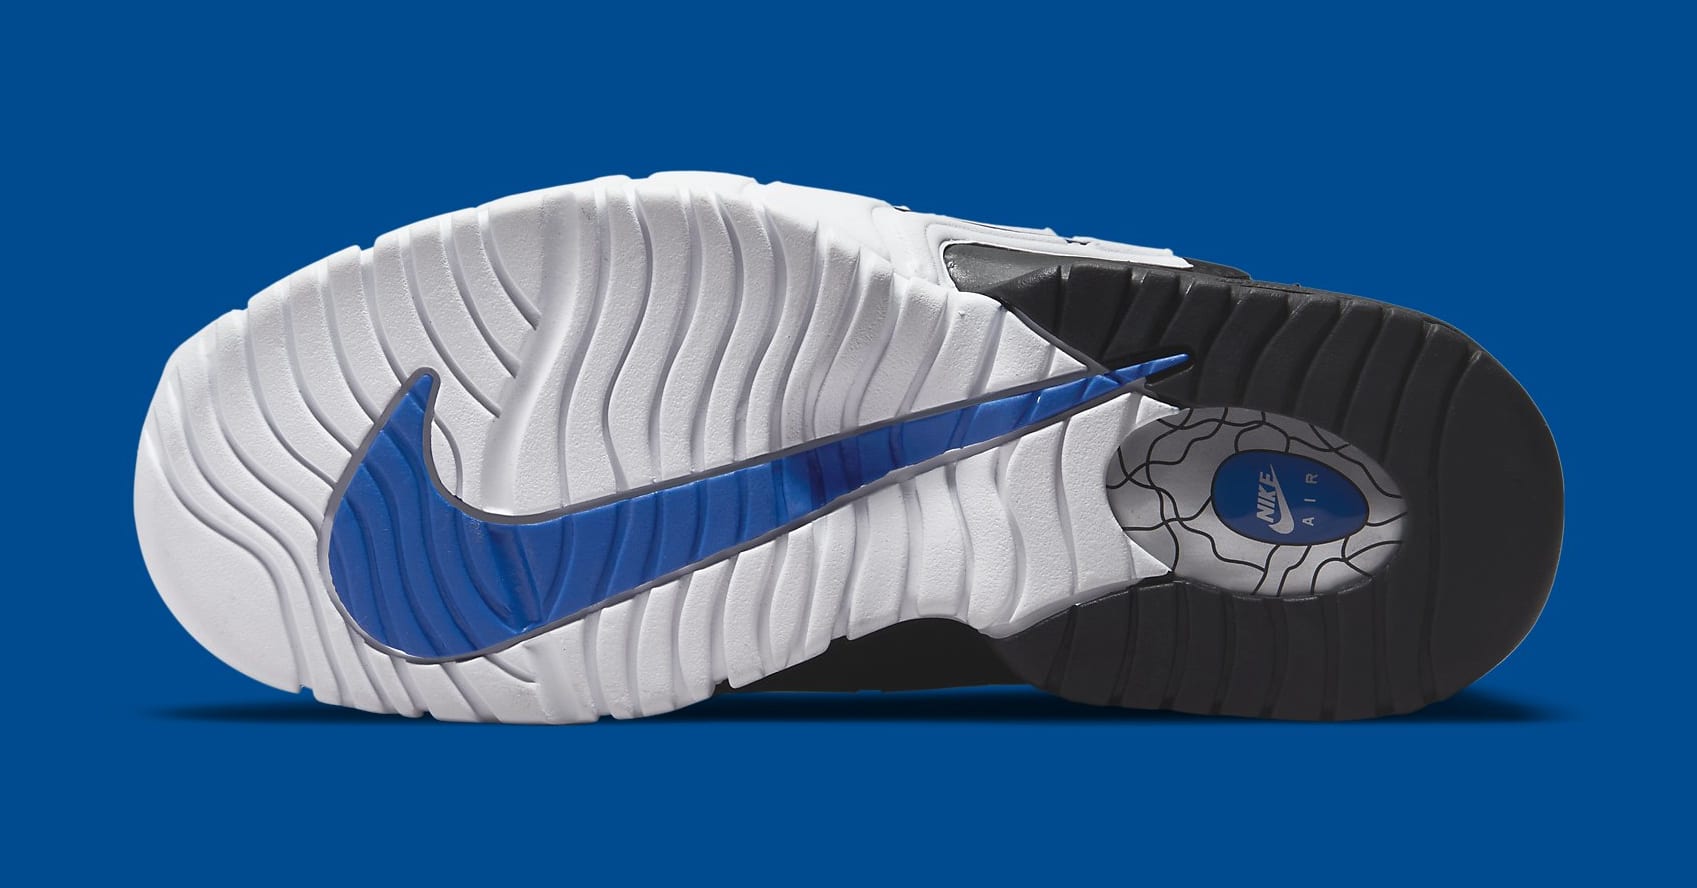 Nike Air Max Penny 1 'Orlando' GS DQ7774 001 Outsole